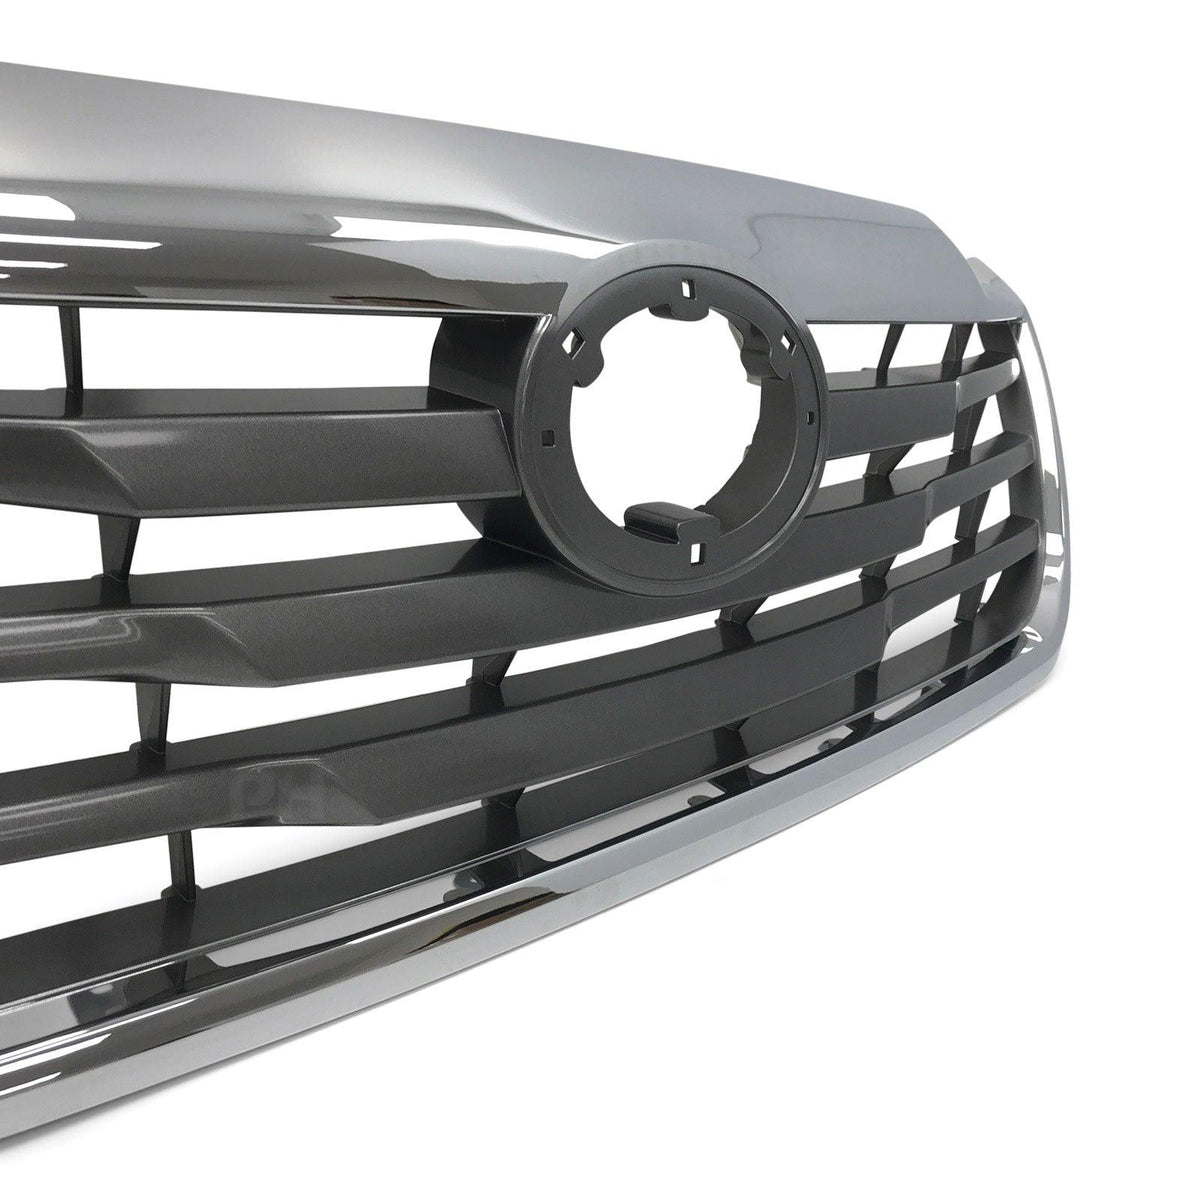 Grill Replacement Chrome & Grey Fits Toyota Hilux 2011 - 2015 SR5 - 4X4OC™